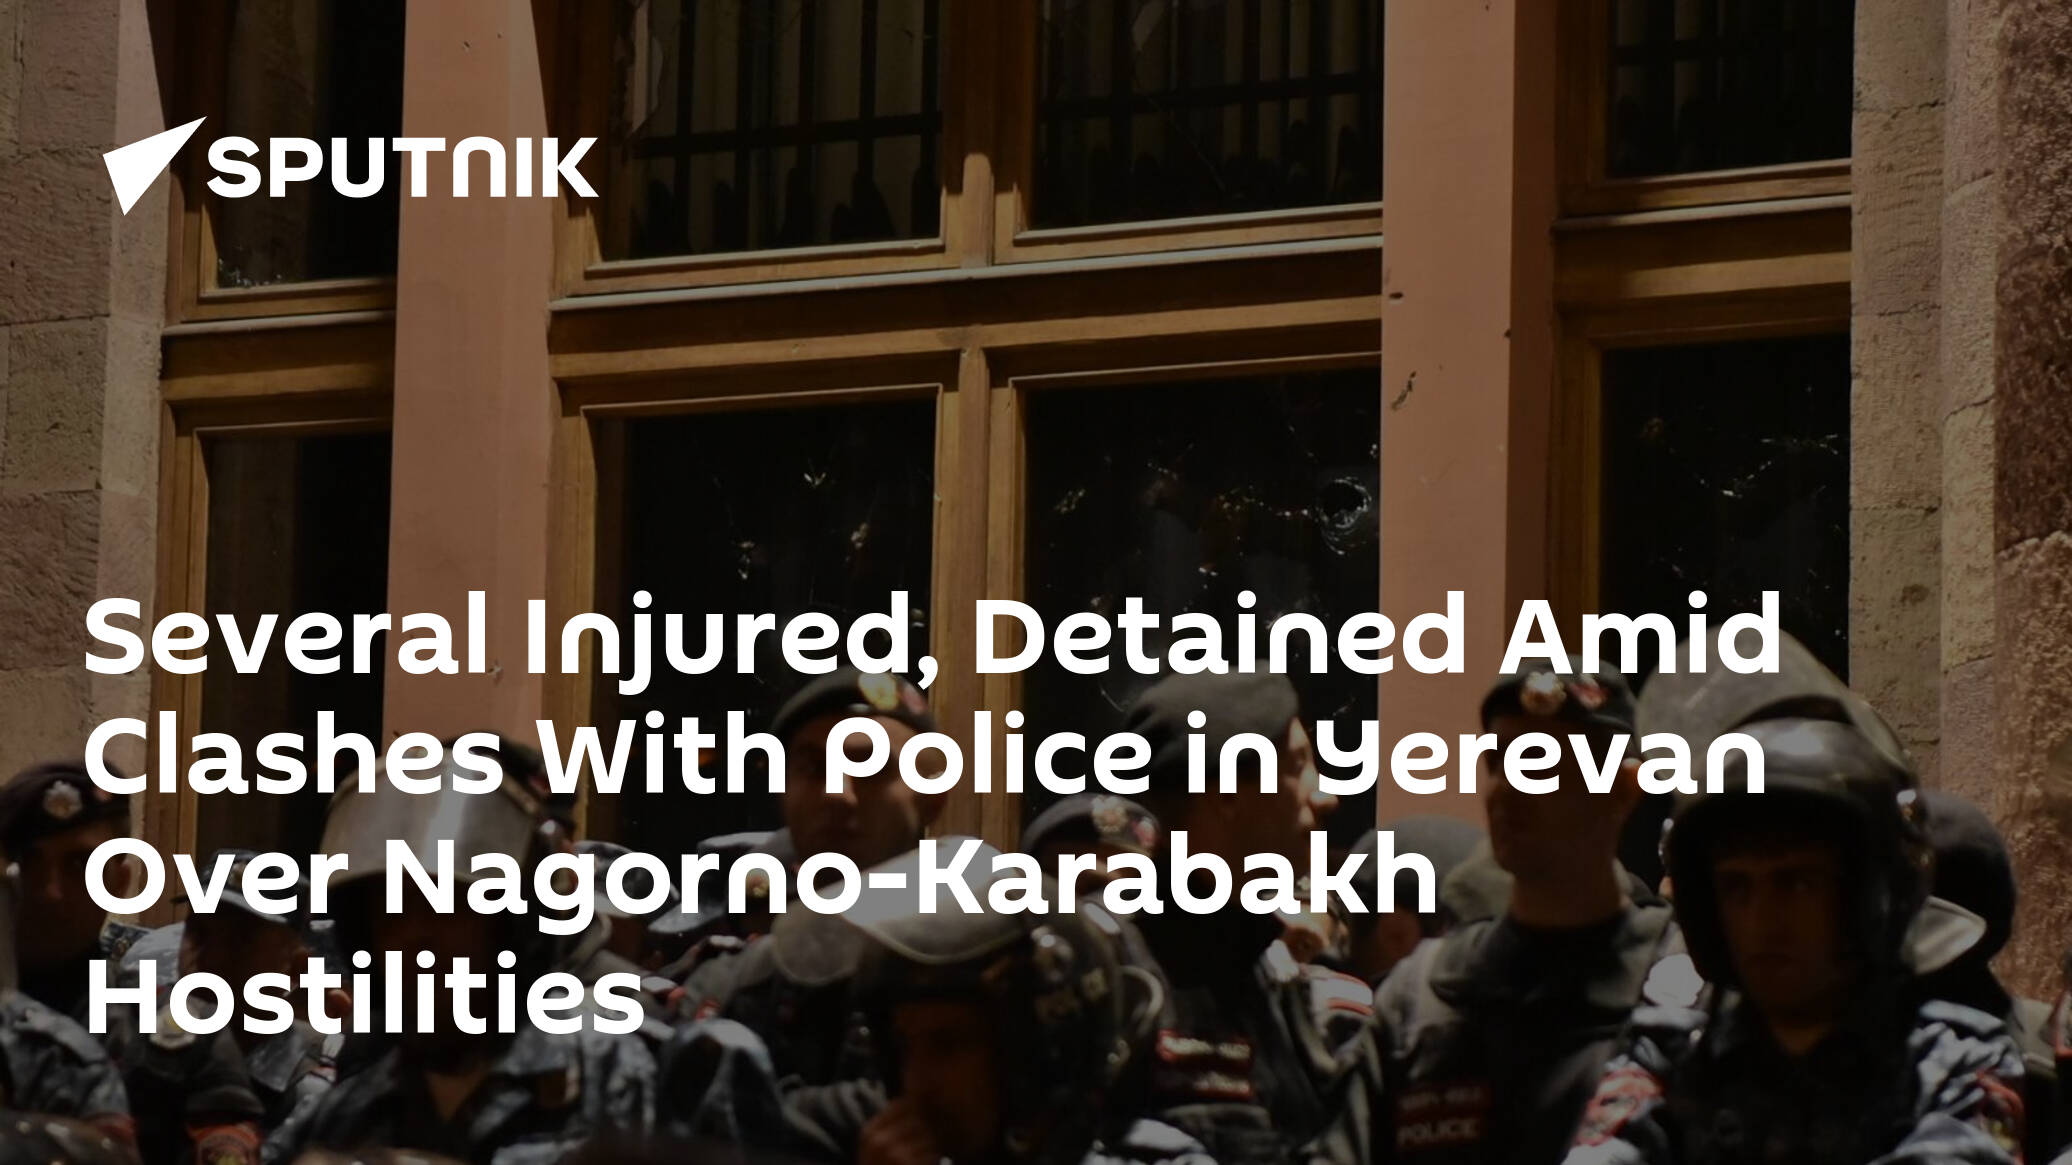 Several Injured, Detained Amid Clashes With Police in Yerevan Over Nagorno-Karabakh Hostilities